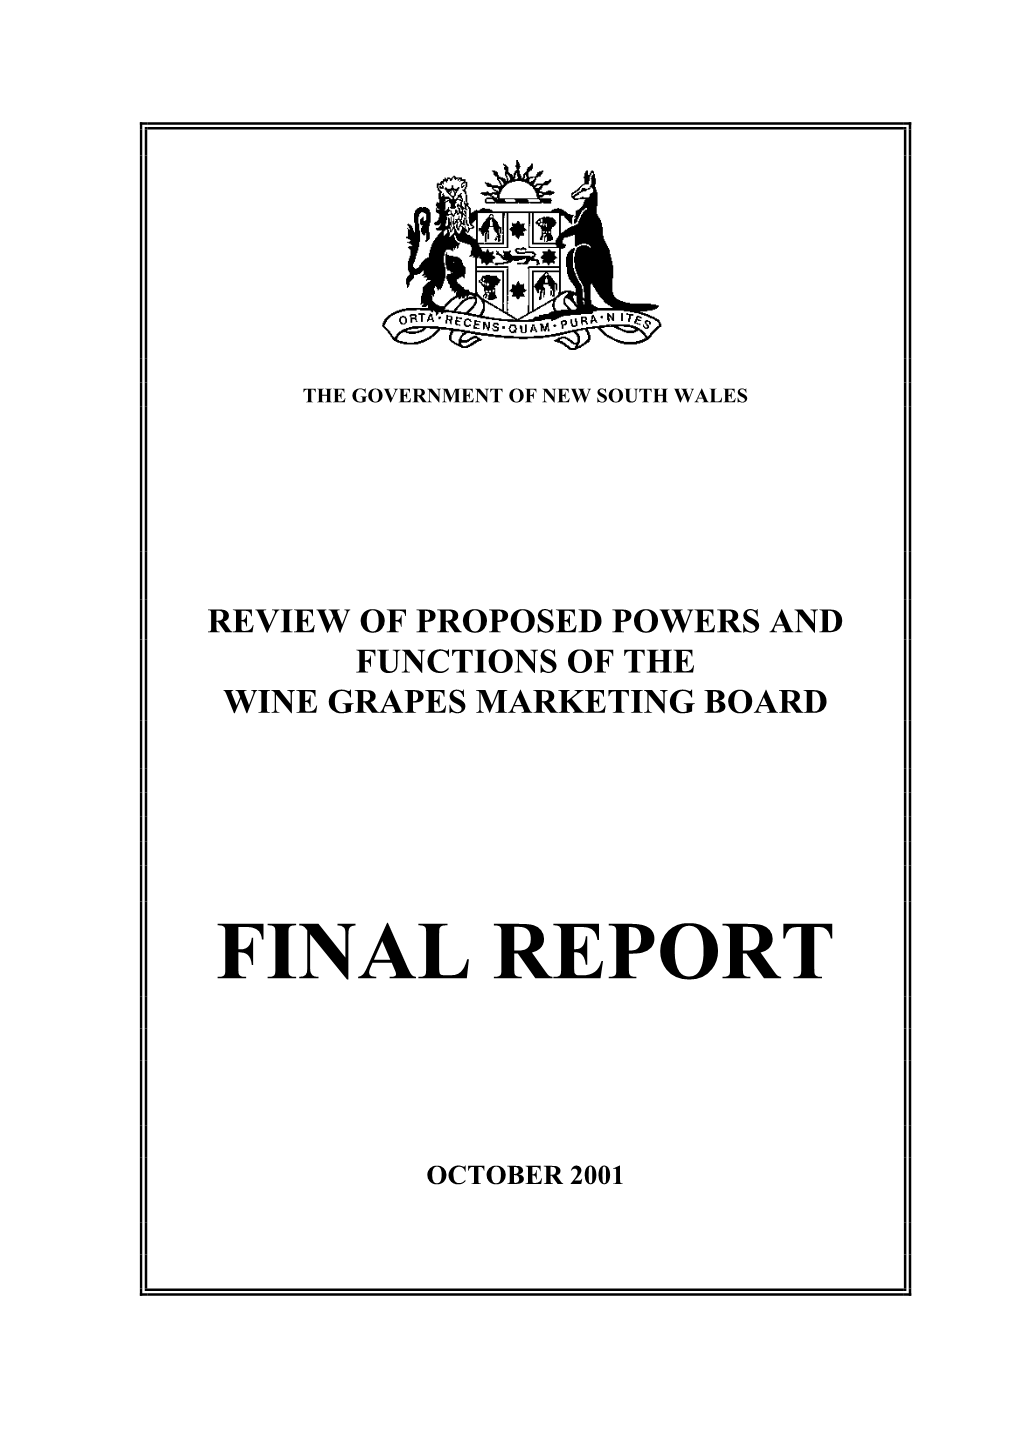 NSW Proposed Powers and Functions of the Wine Grapes Marketing Board, Final Review Report, October 2001